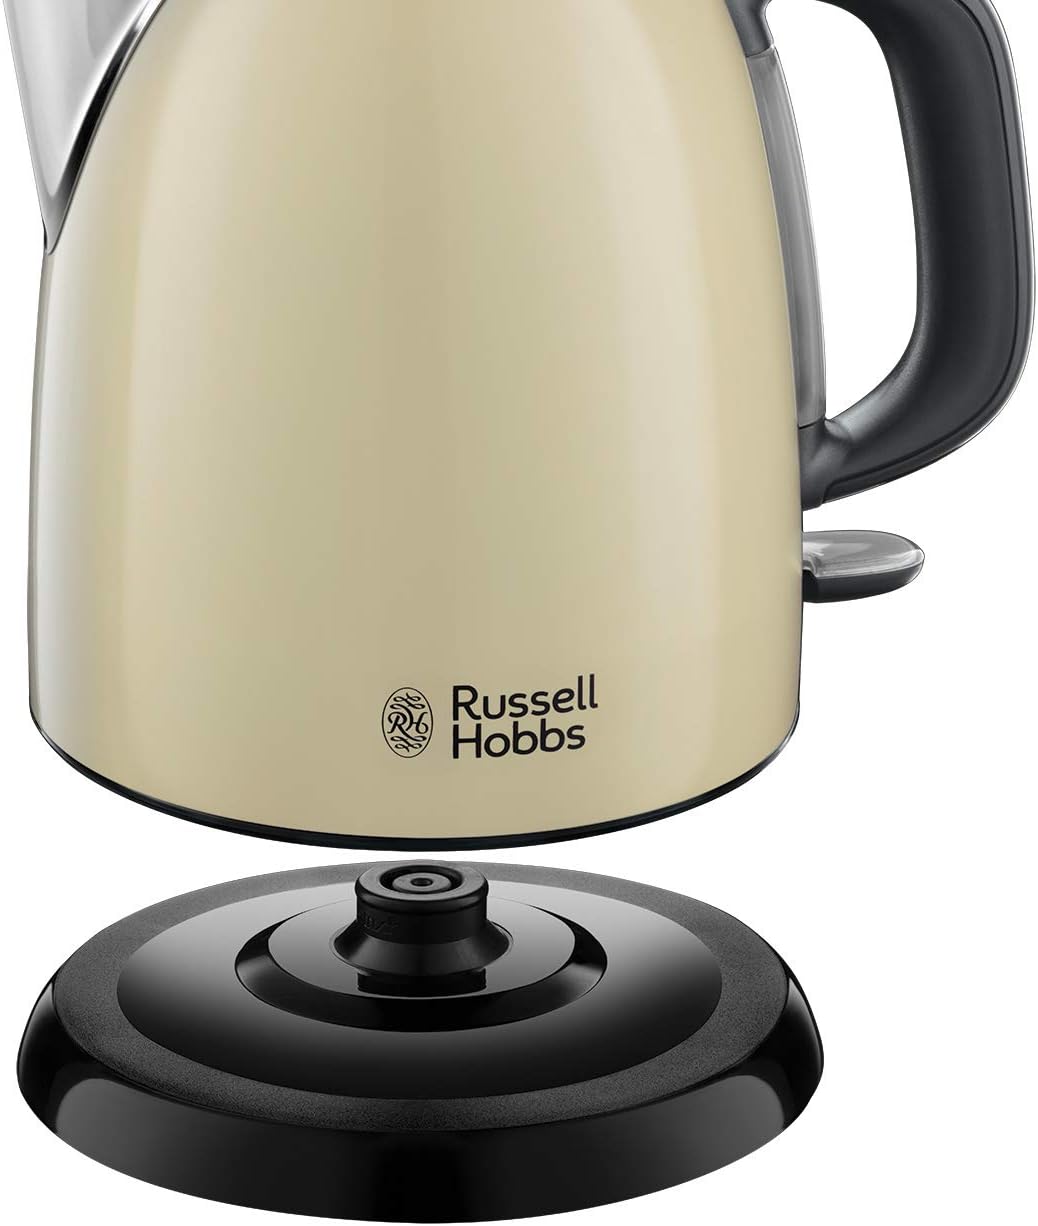 Russell Hobbs Colours+ 24994-70 Kettle [1.0 L] Stainless Steel Cream (2400 W, Quick Boil Function, Removable Limescale Filter, External Water Level Indicator, Small Travel Kettle)